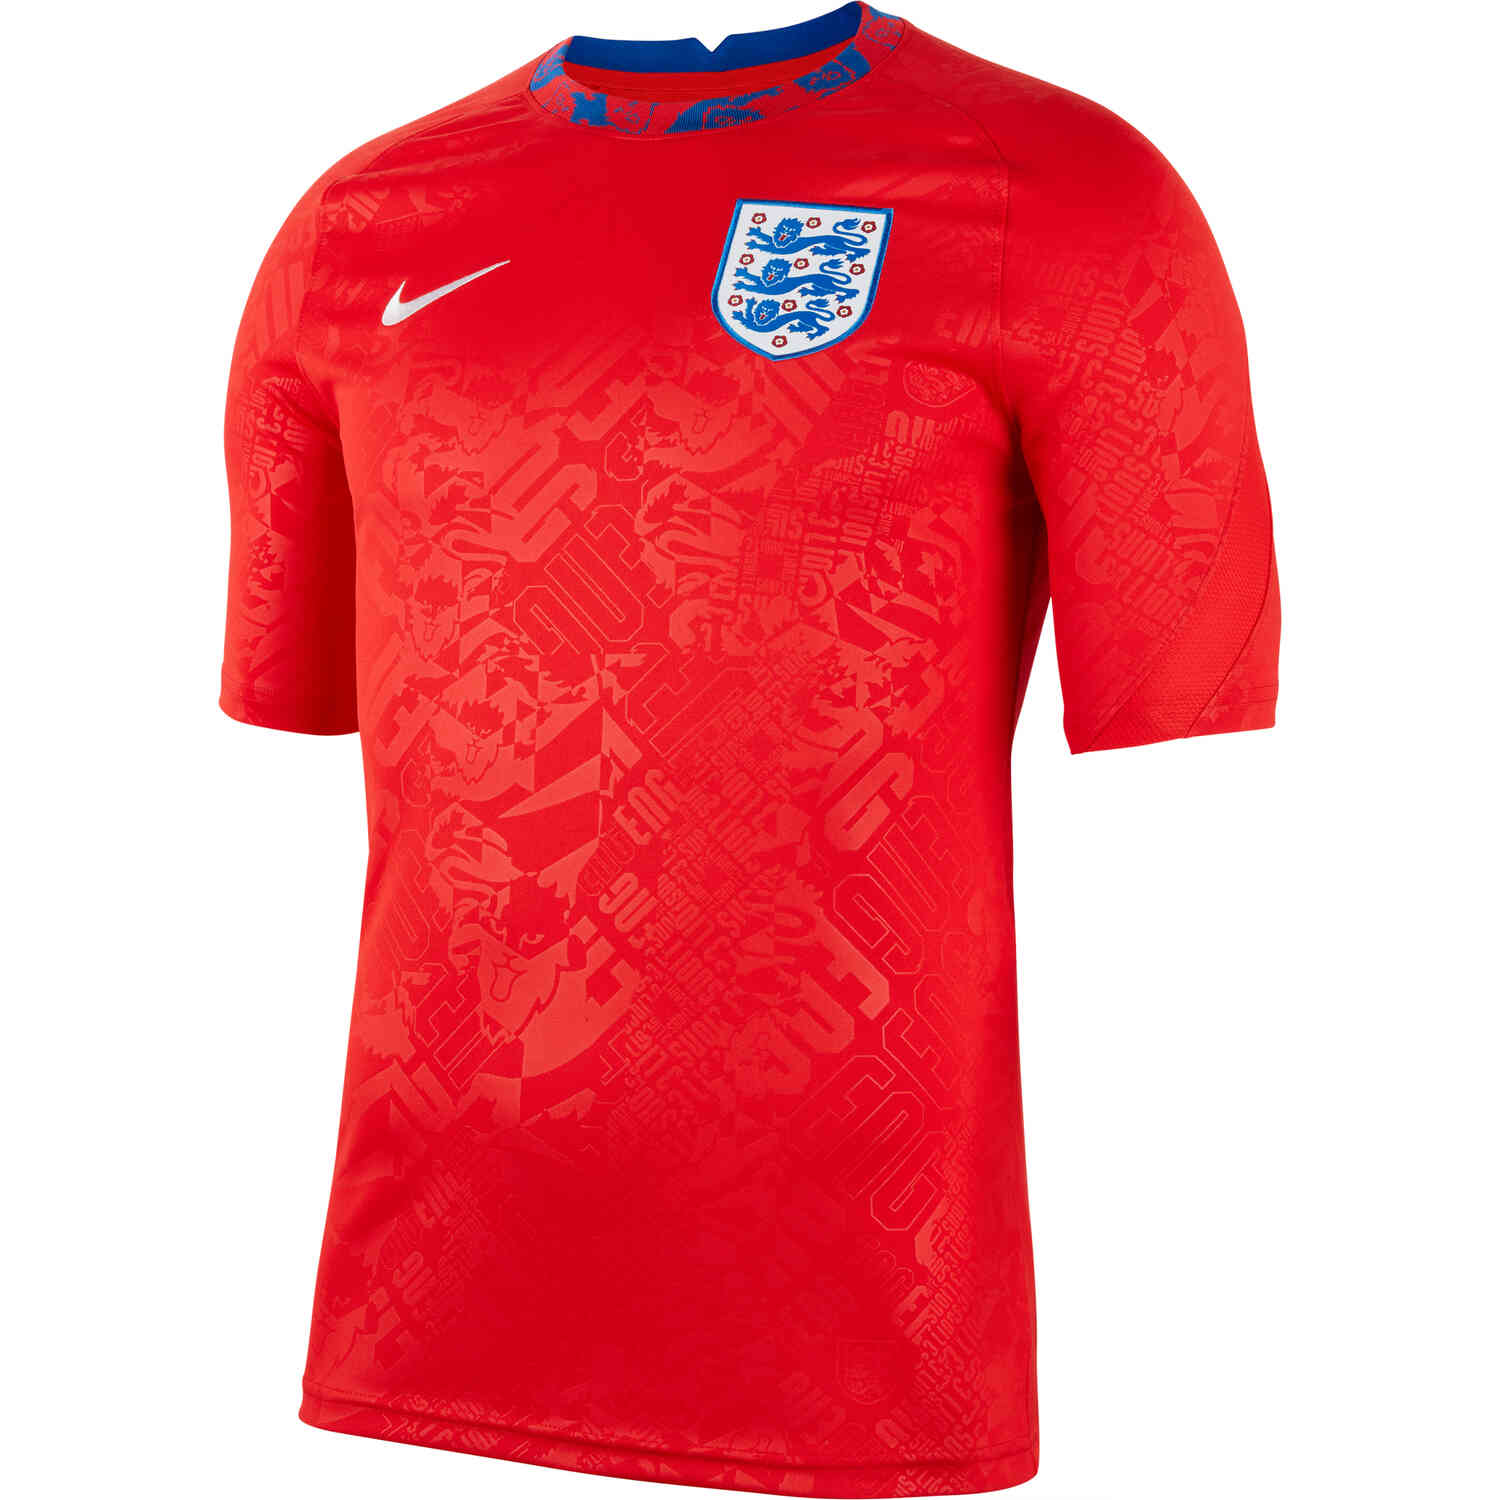 Nike England PreMatch Top Challenge Red & White